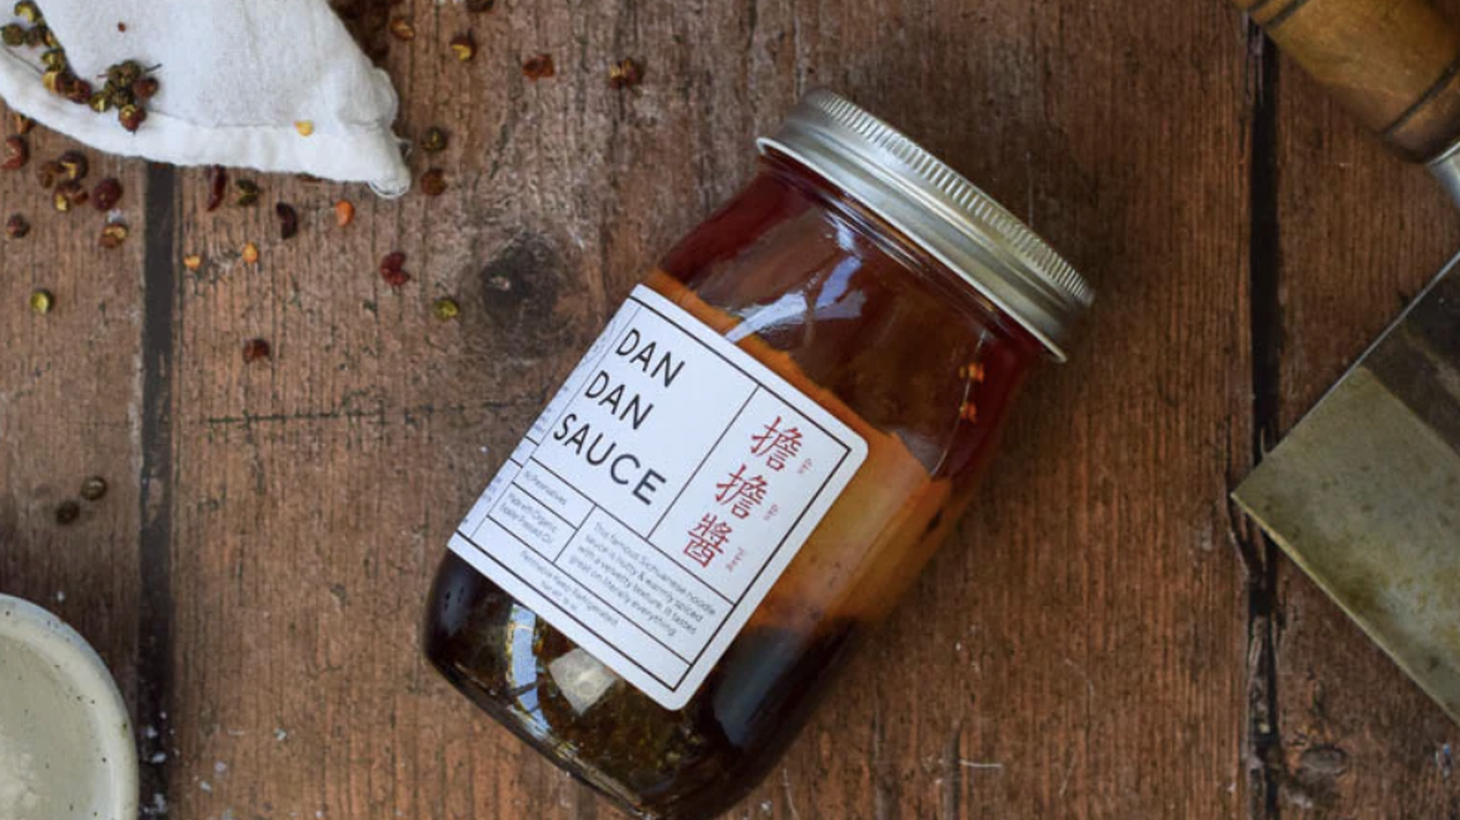 Luxurious Dan Dan sauce from Chinese Laundry comes in beautiful and thoughtful packaging.